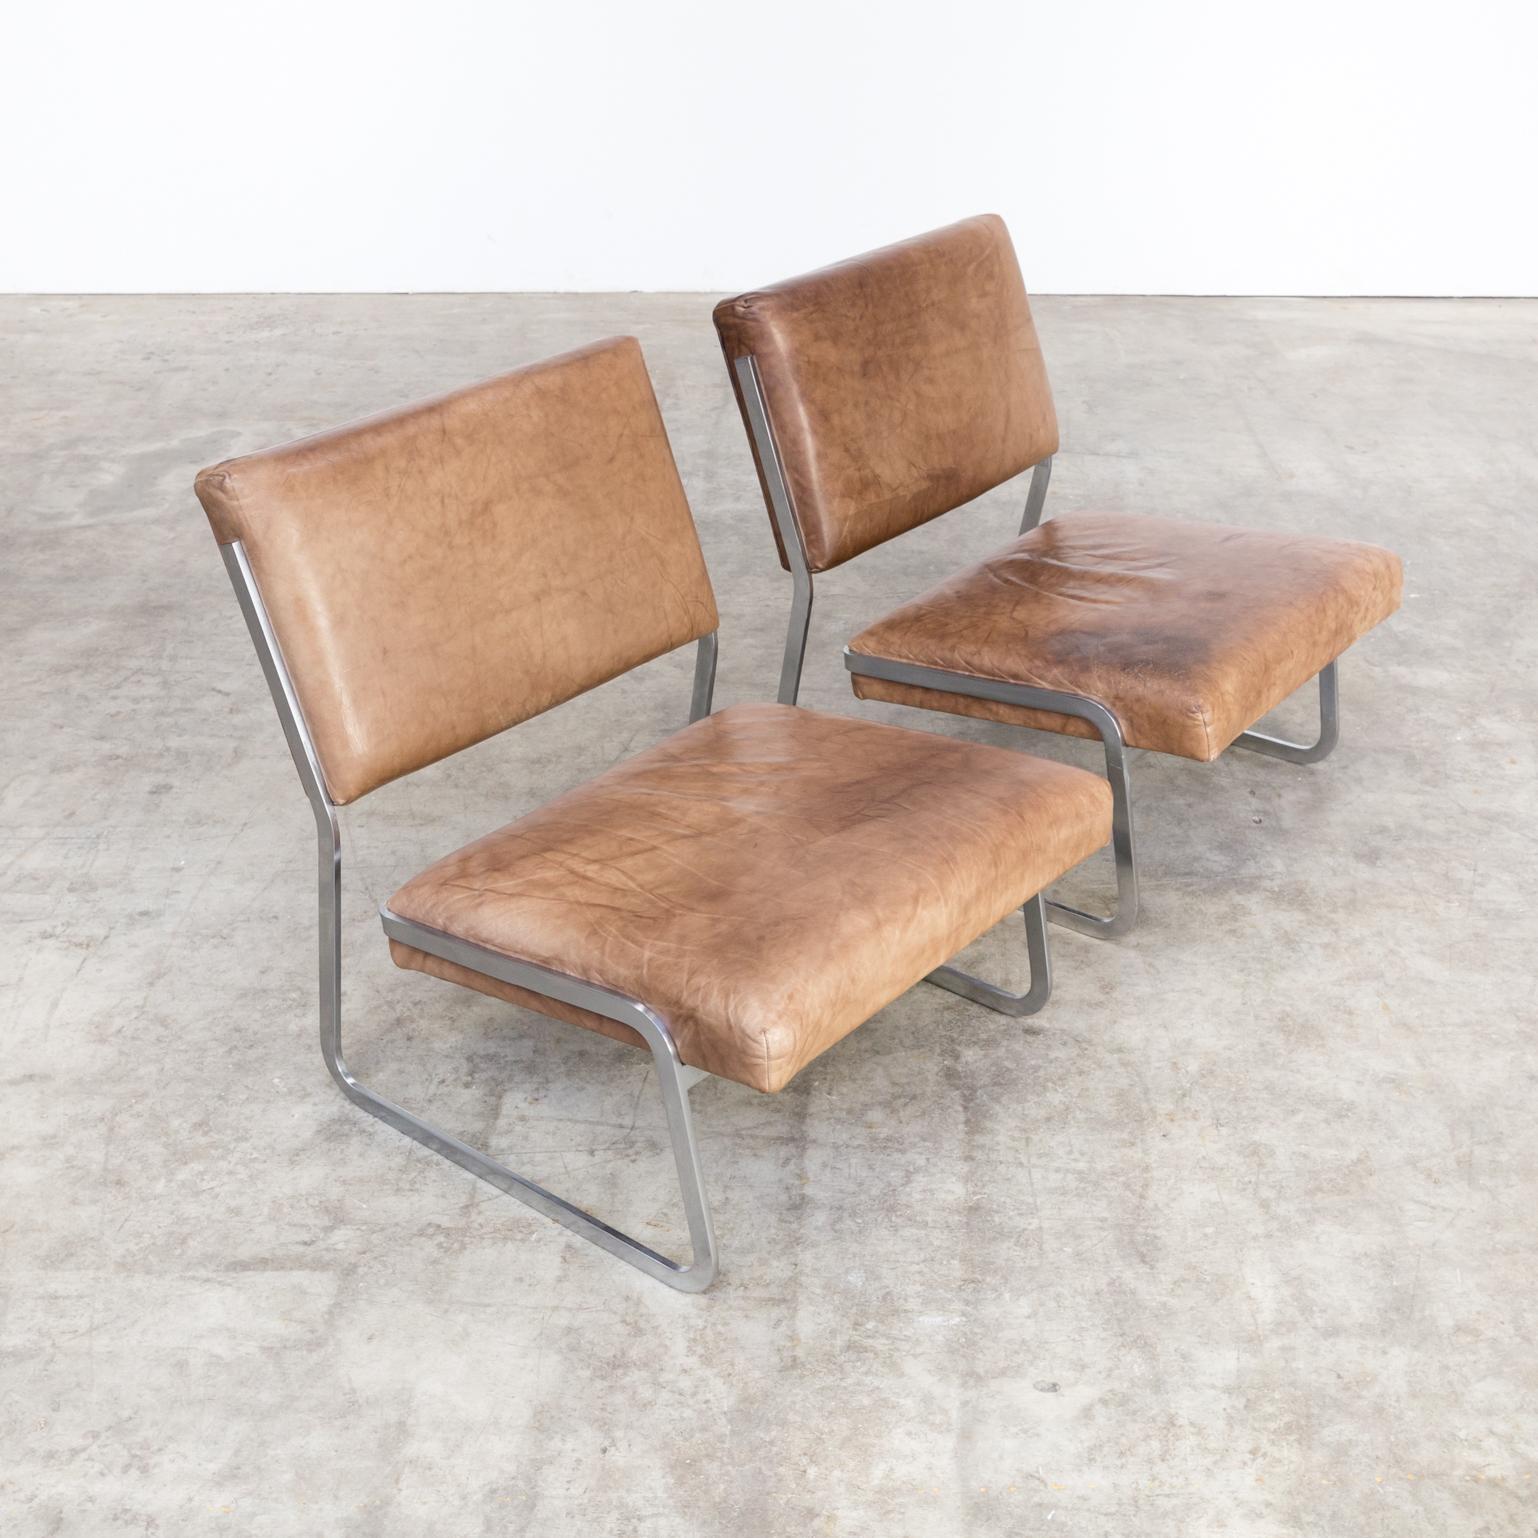 Mid-20th Century 1960s Paul Sumi Steel Framed Leather Lounge Chairs for Lübke & Rolf Set of 2 For Sale